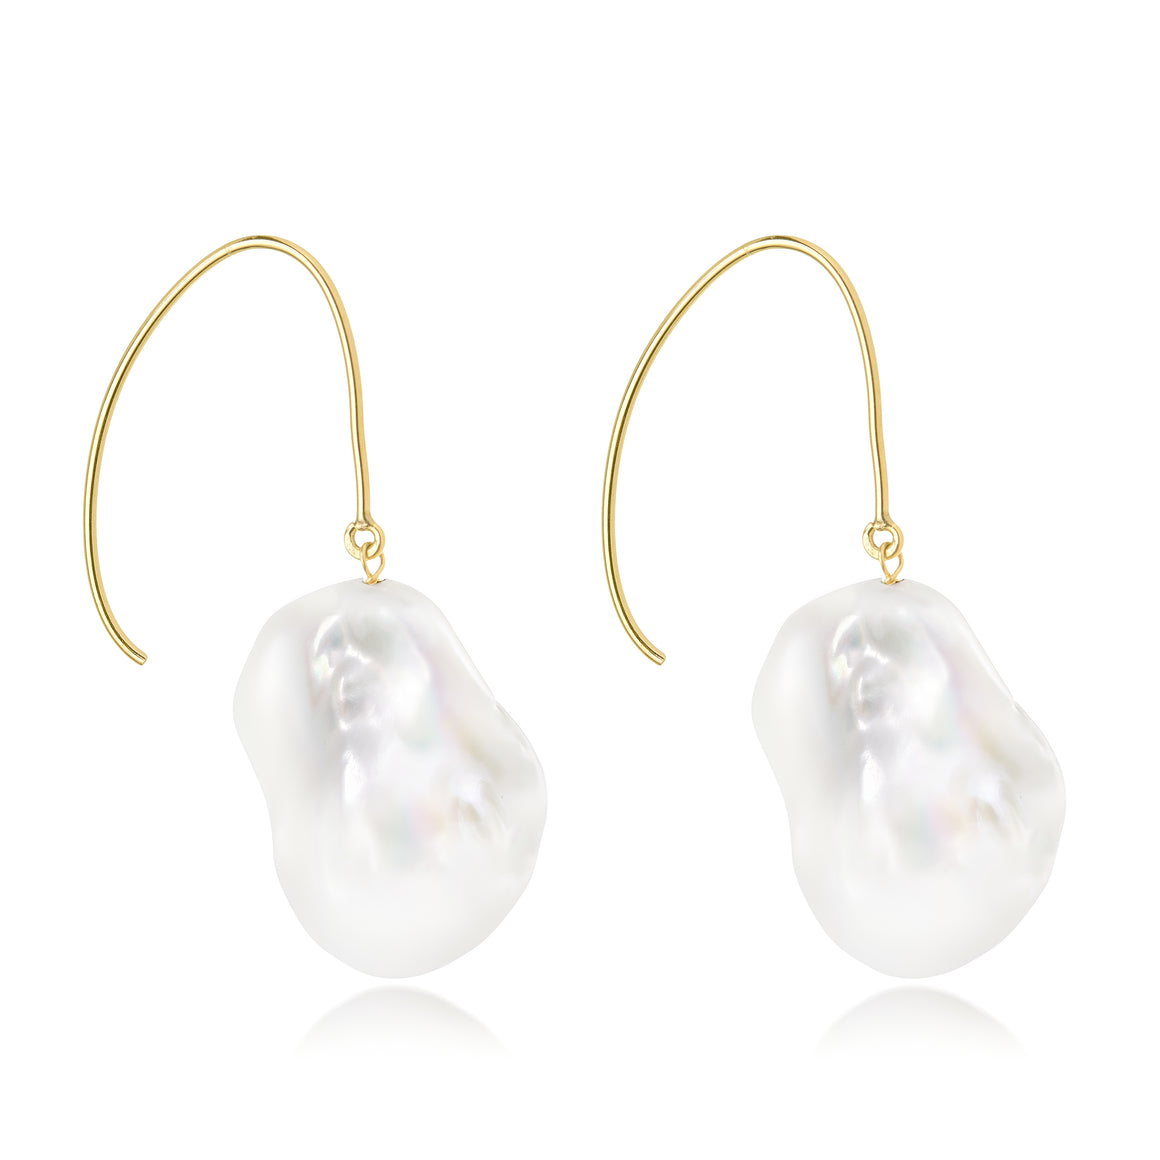 Le Lac Large White Baroque Freshwater Pearl Drop Earrings In 14K Yellow Gold-Filled